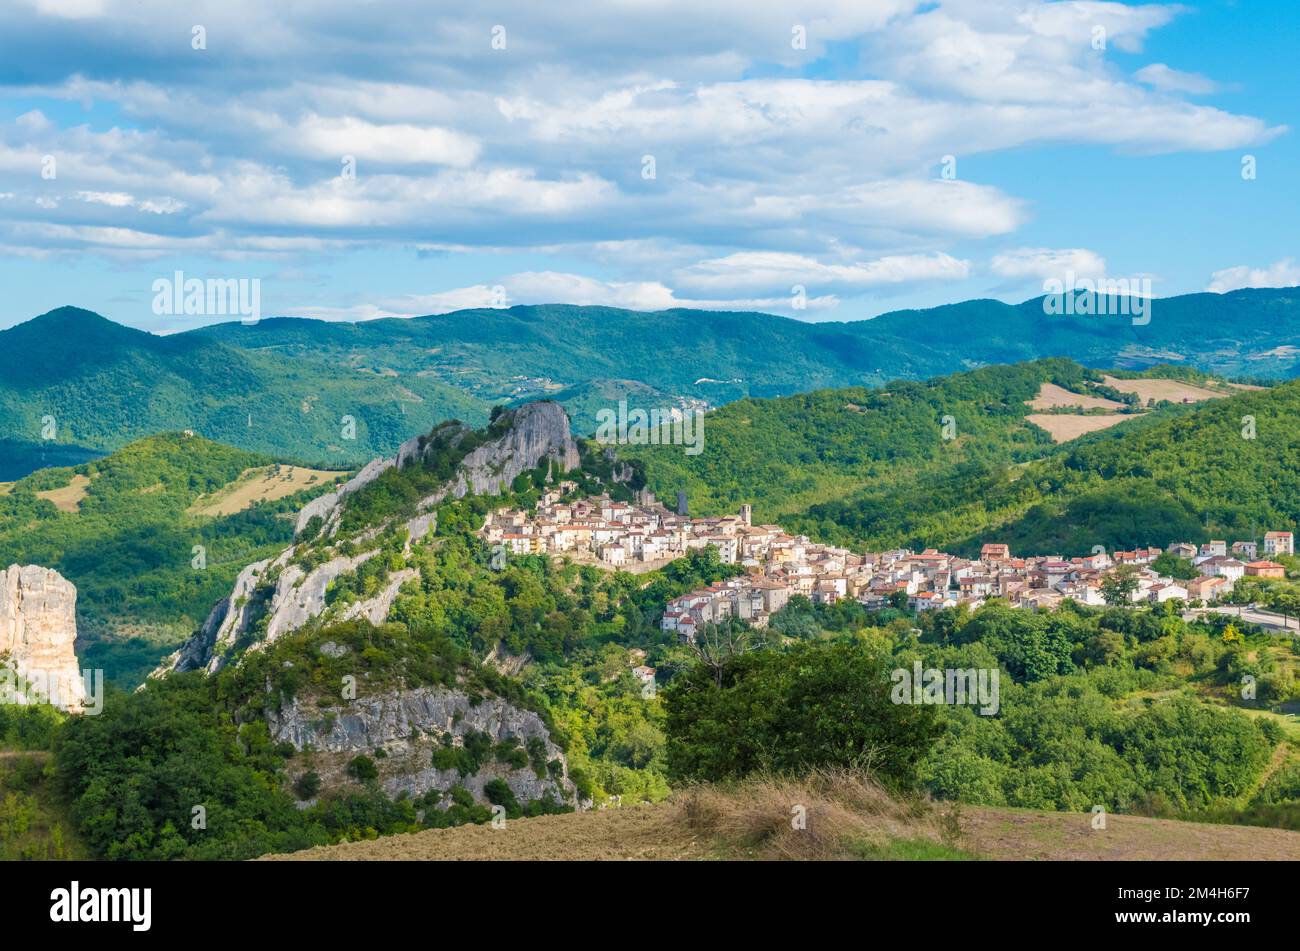 Pennadomo (Italy) - A small town on the rock, in Abruzzo region, Val di Sangro, beside Lake of Bomba Stock Photo